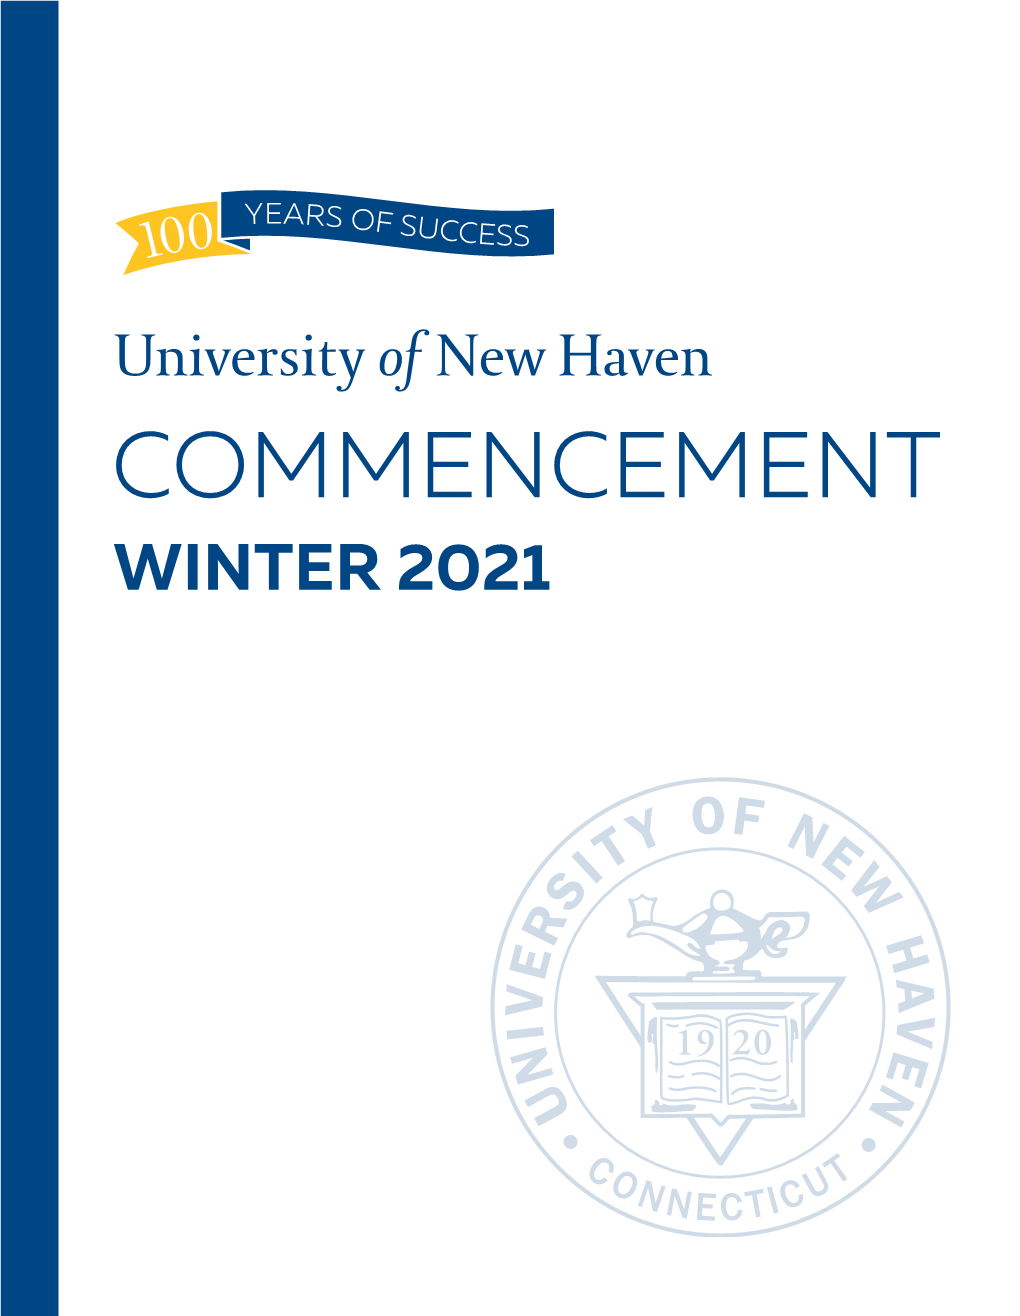 COMMENCEMENT WINTER 2021 Congratulations, to the University of New Haven Graduates!